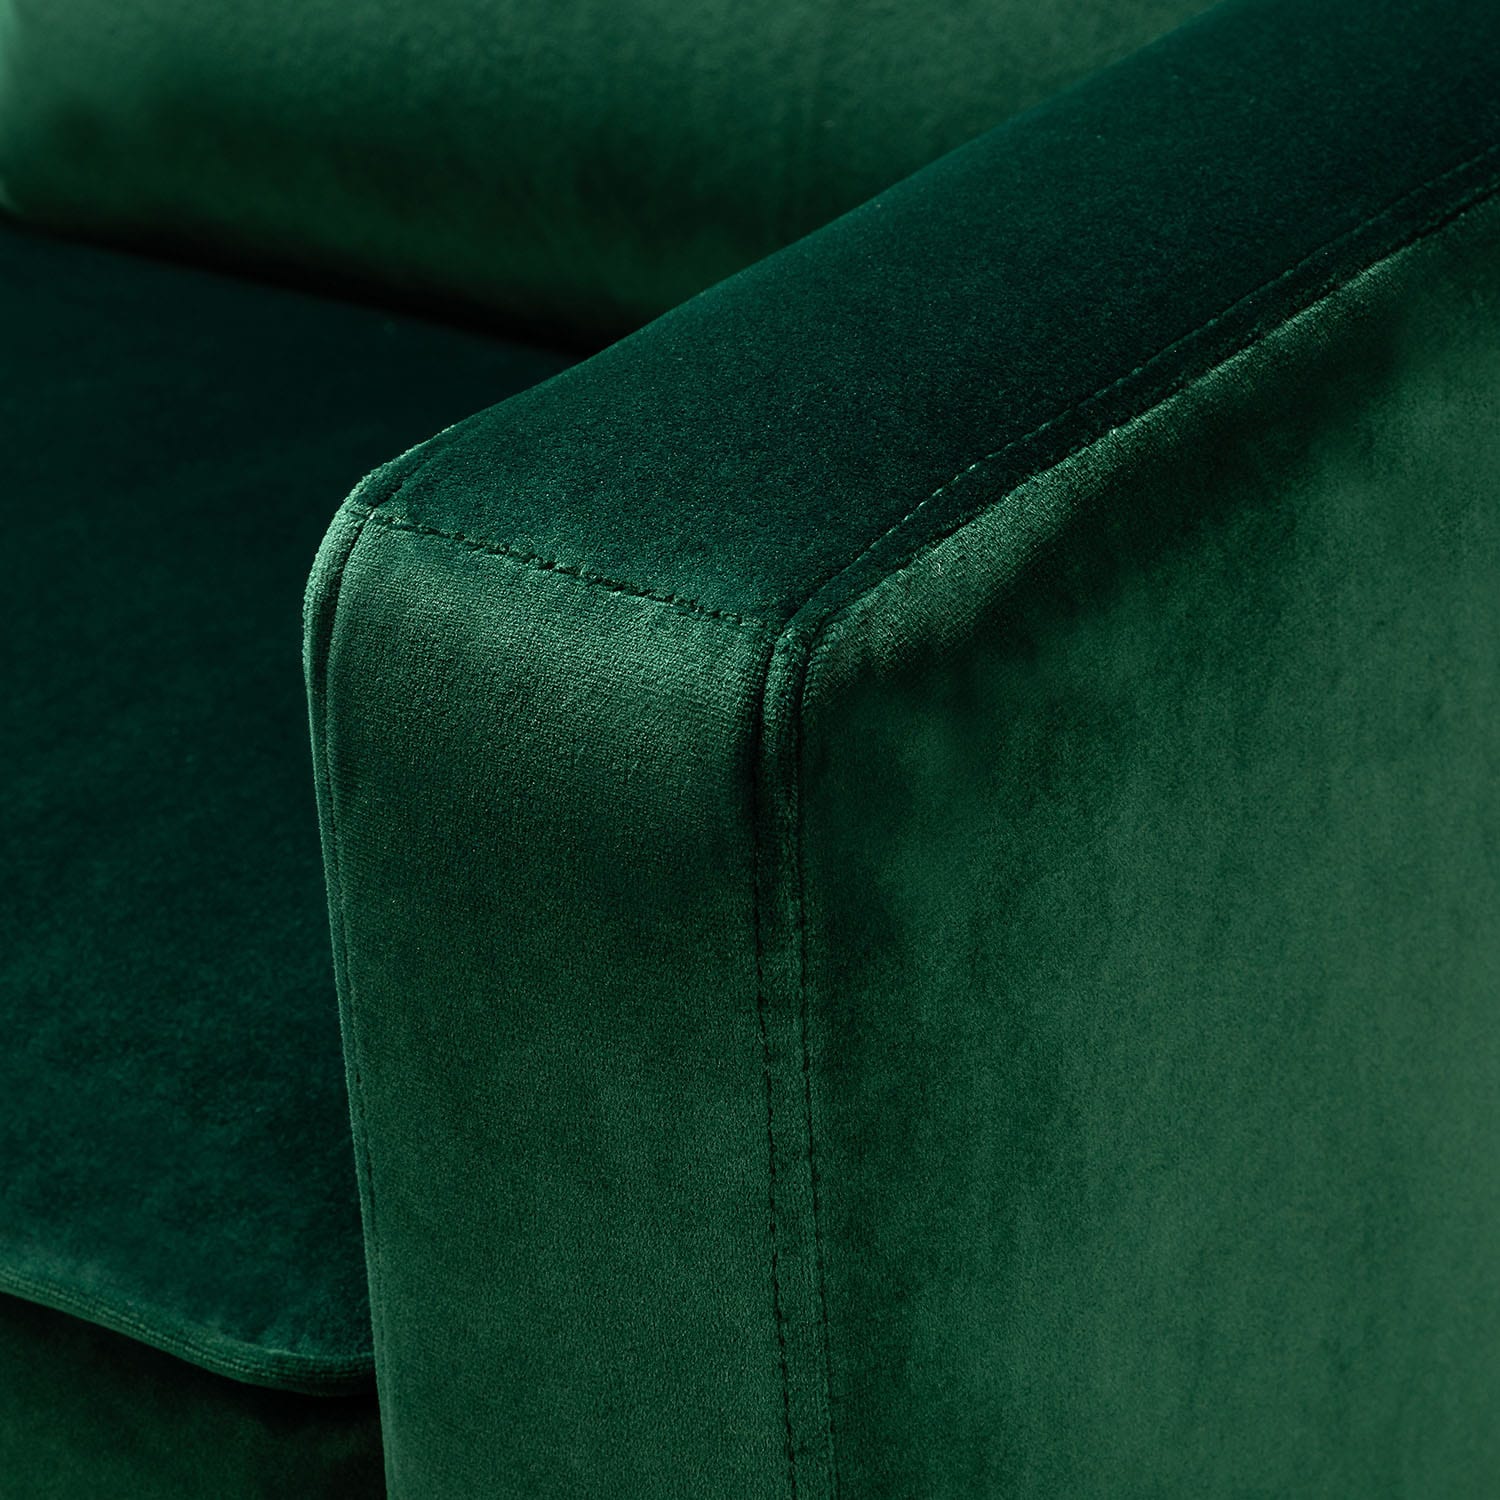 Couches Love & Green taille 4 (7-14 kg) - Pharmacie de la Paderne